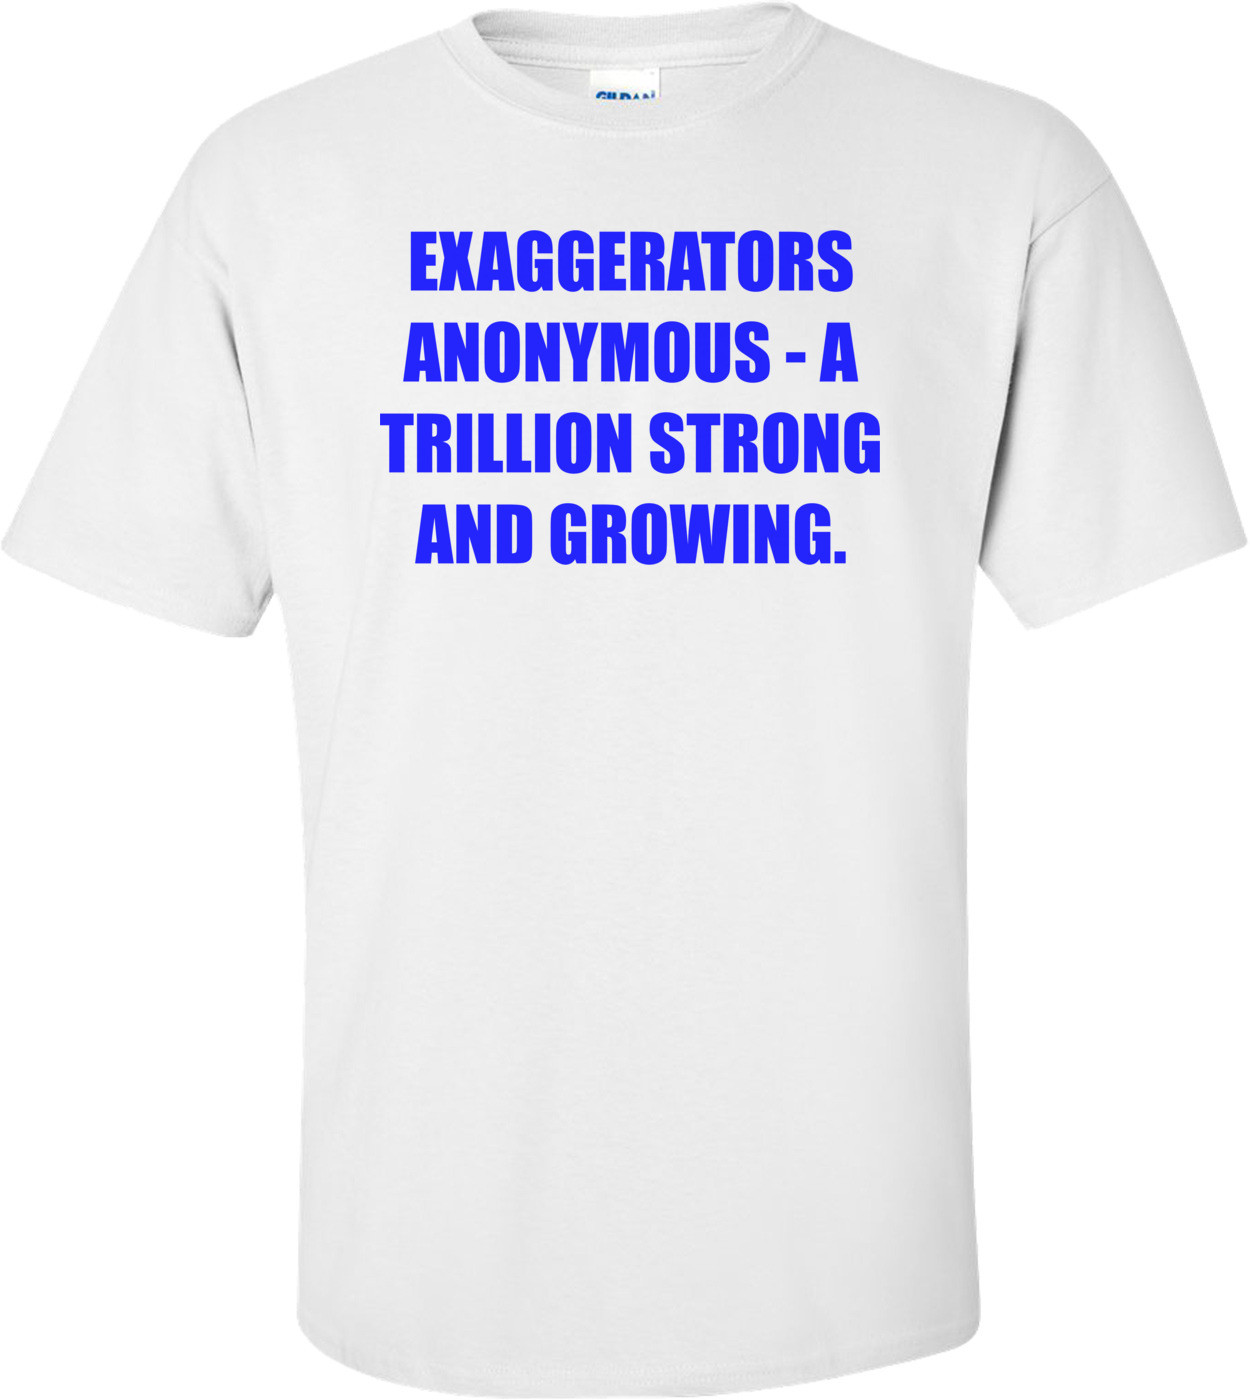 EXAGGERATORS ANONYMOUS - A TRILLION STRONG AND GROWING. Shirt